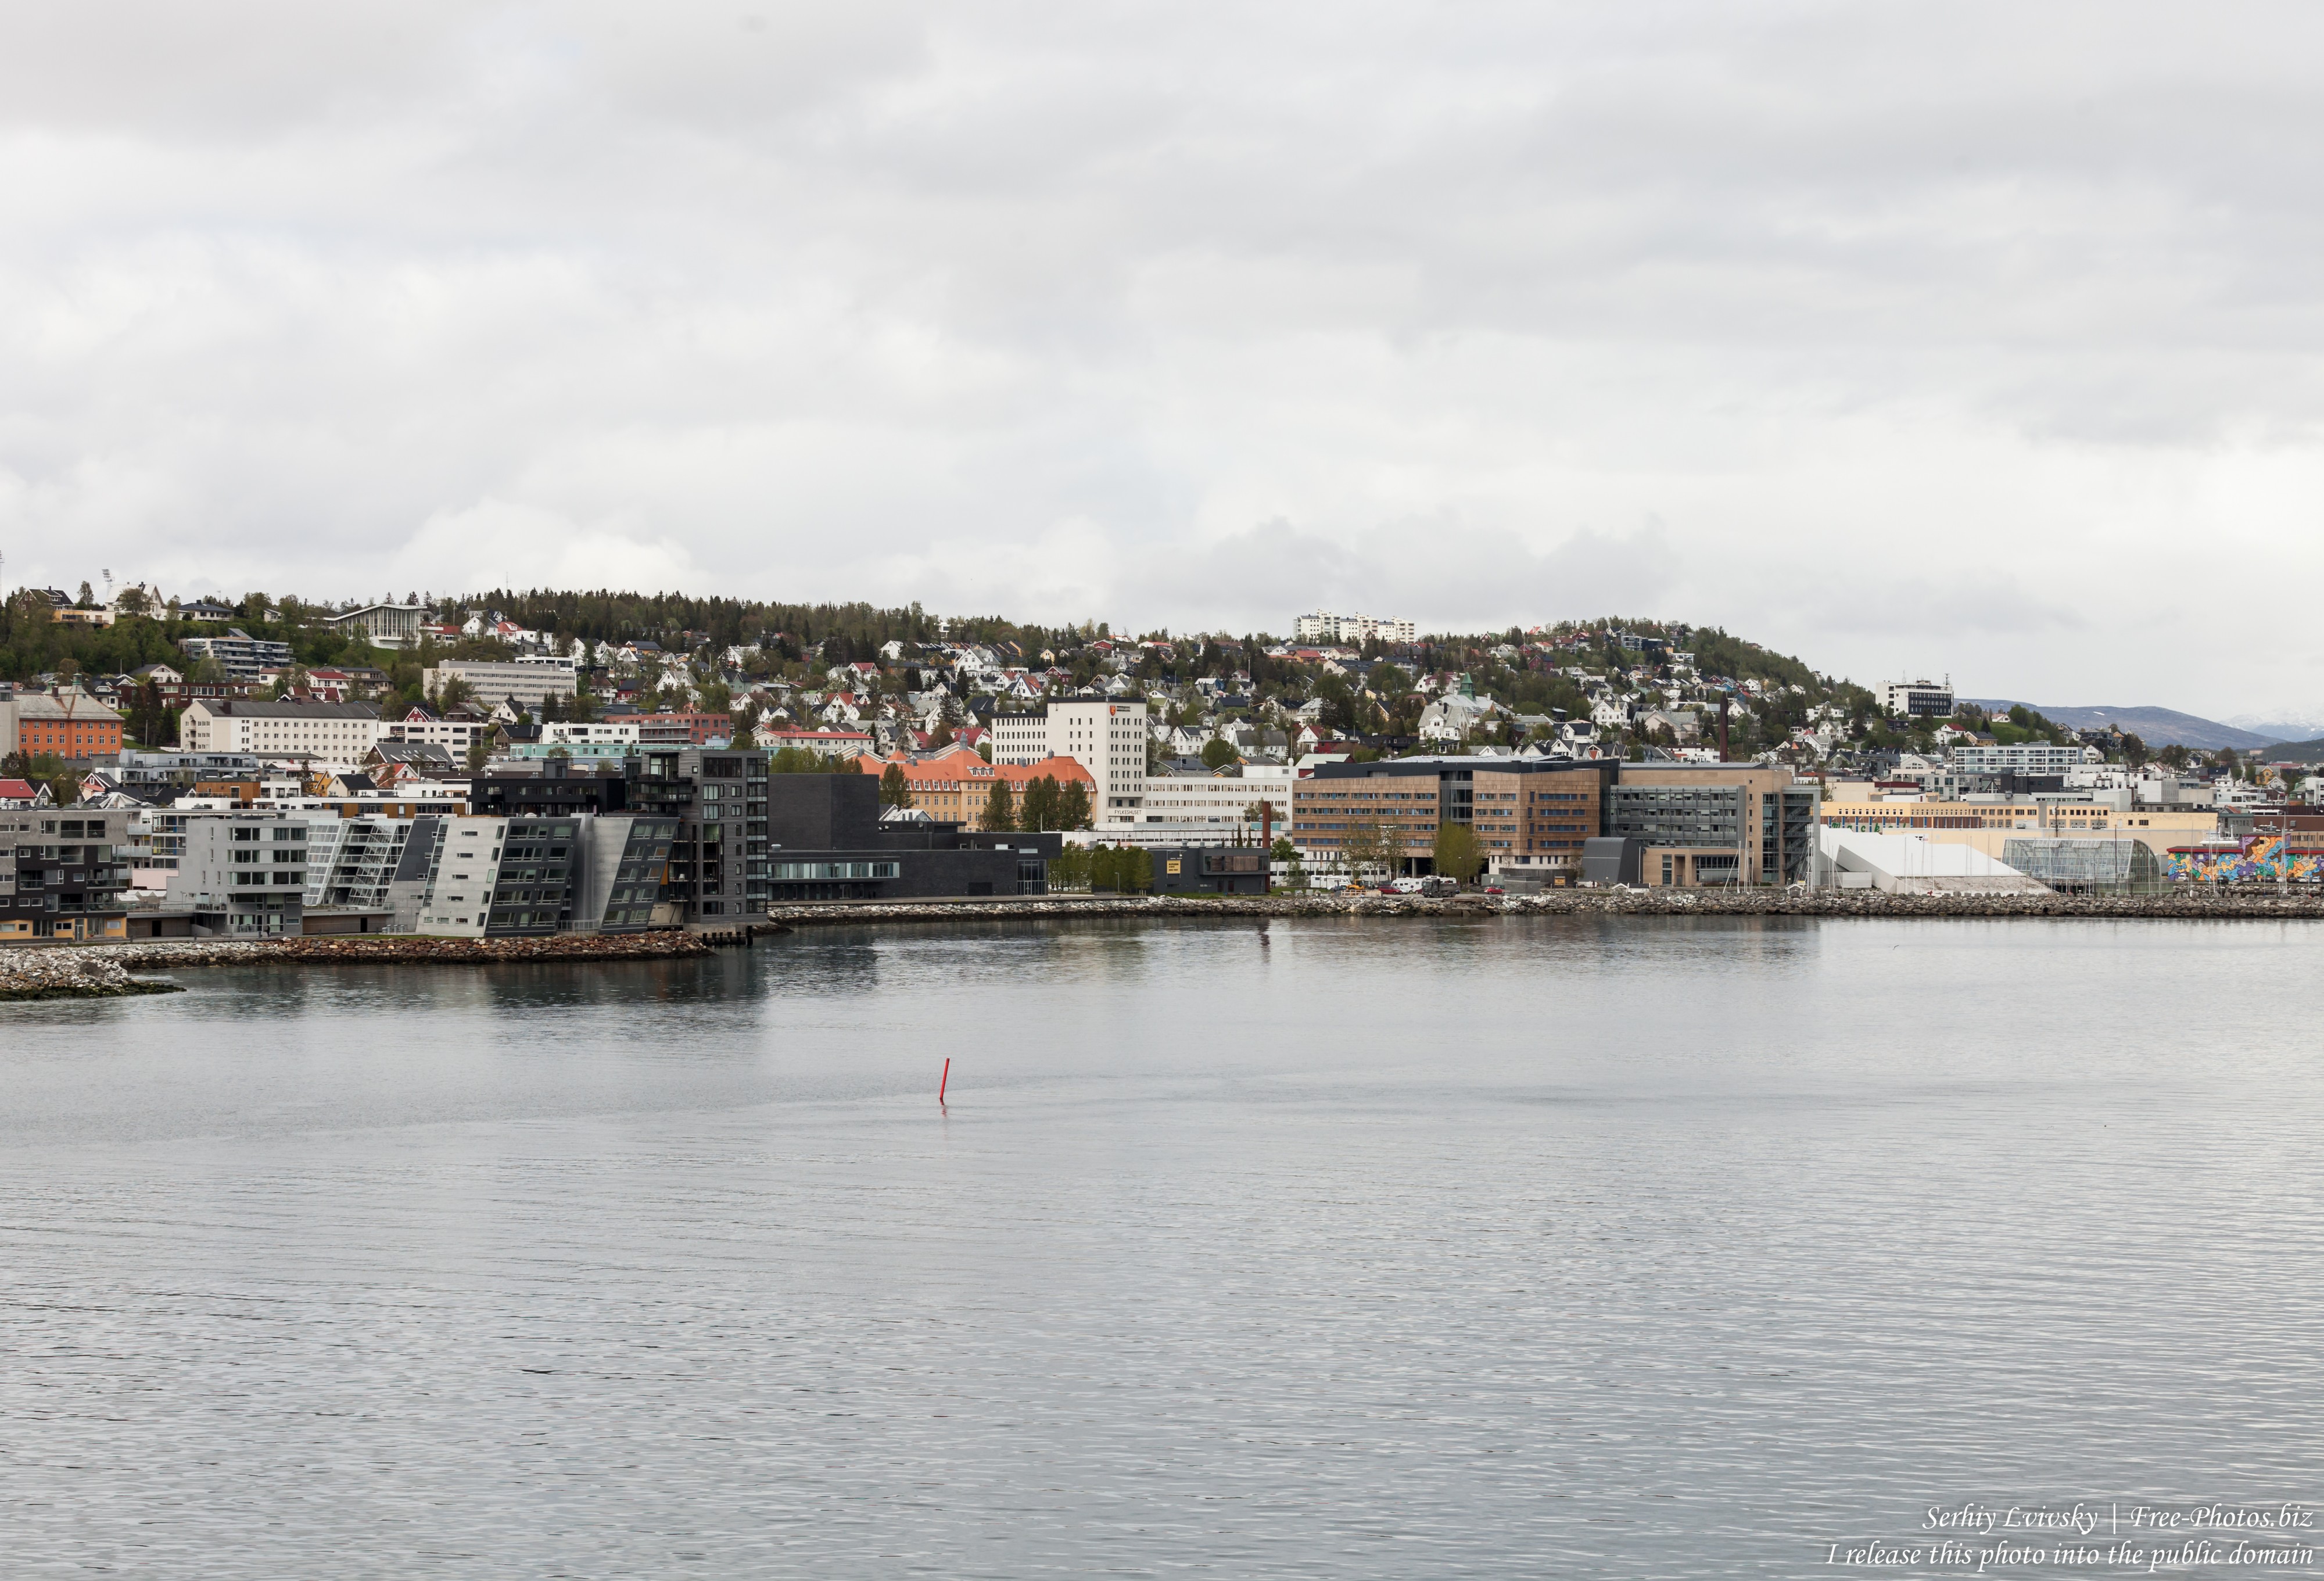 Tromso, Norway, photographed in June 2018 by Serhiy Lvivsky, picture 25